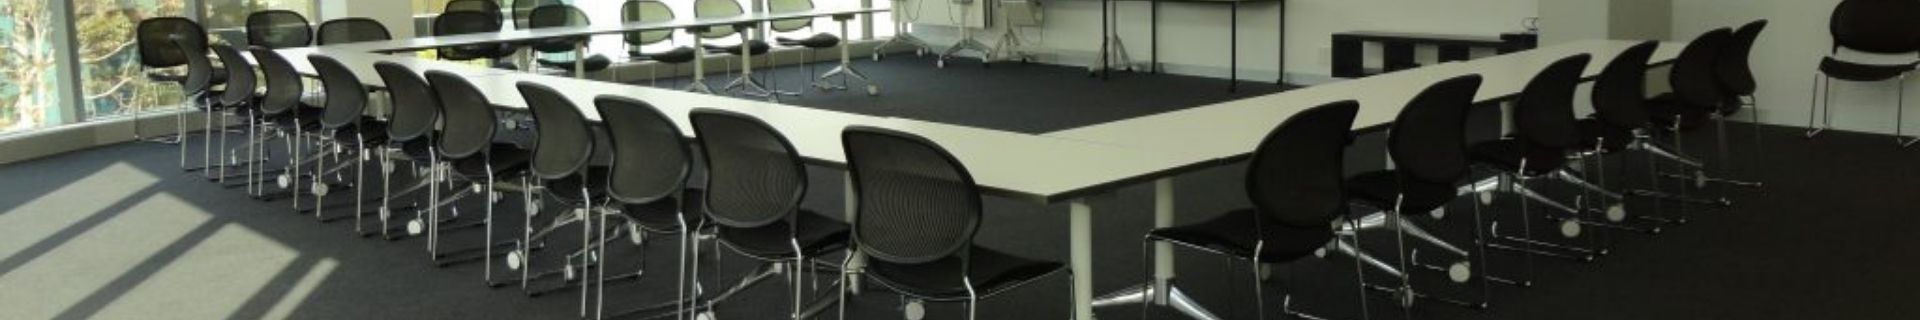 Training & Meeting Room for Hire